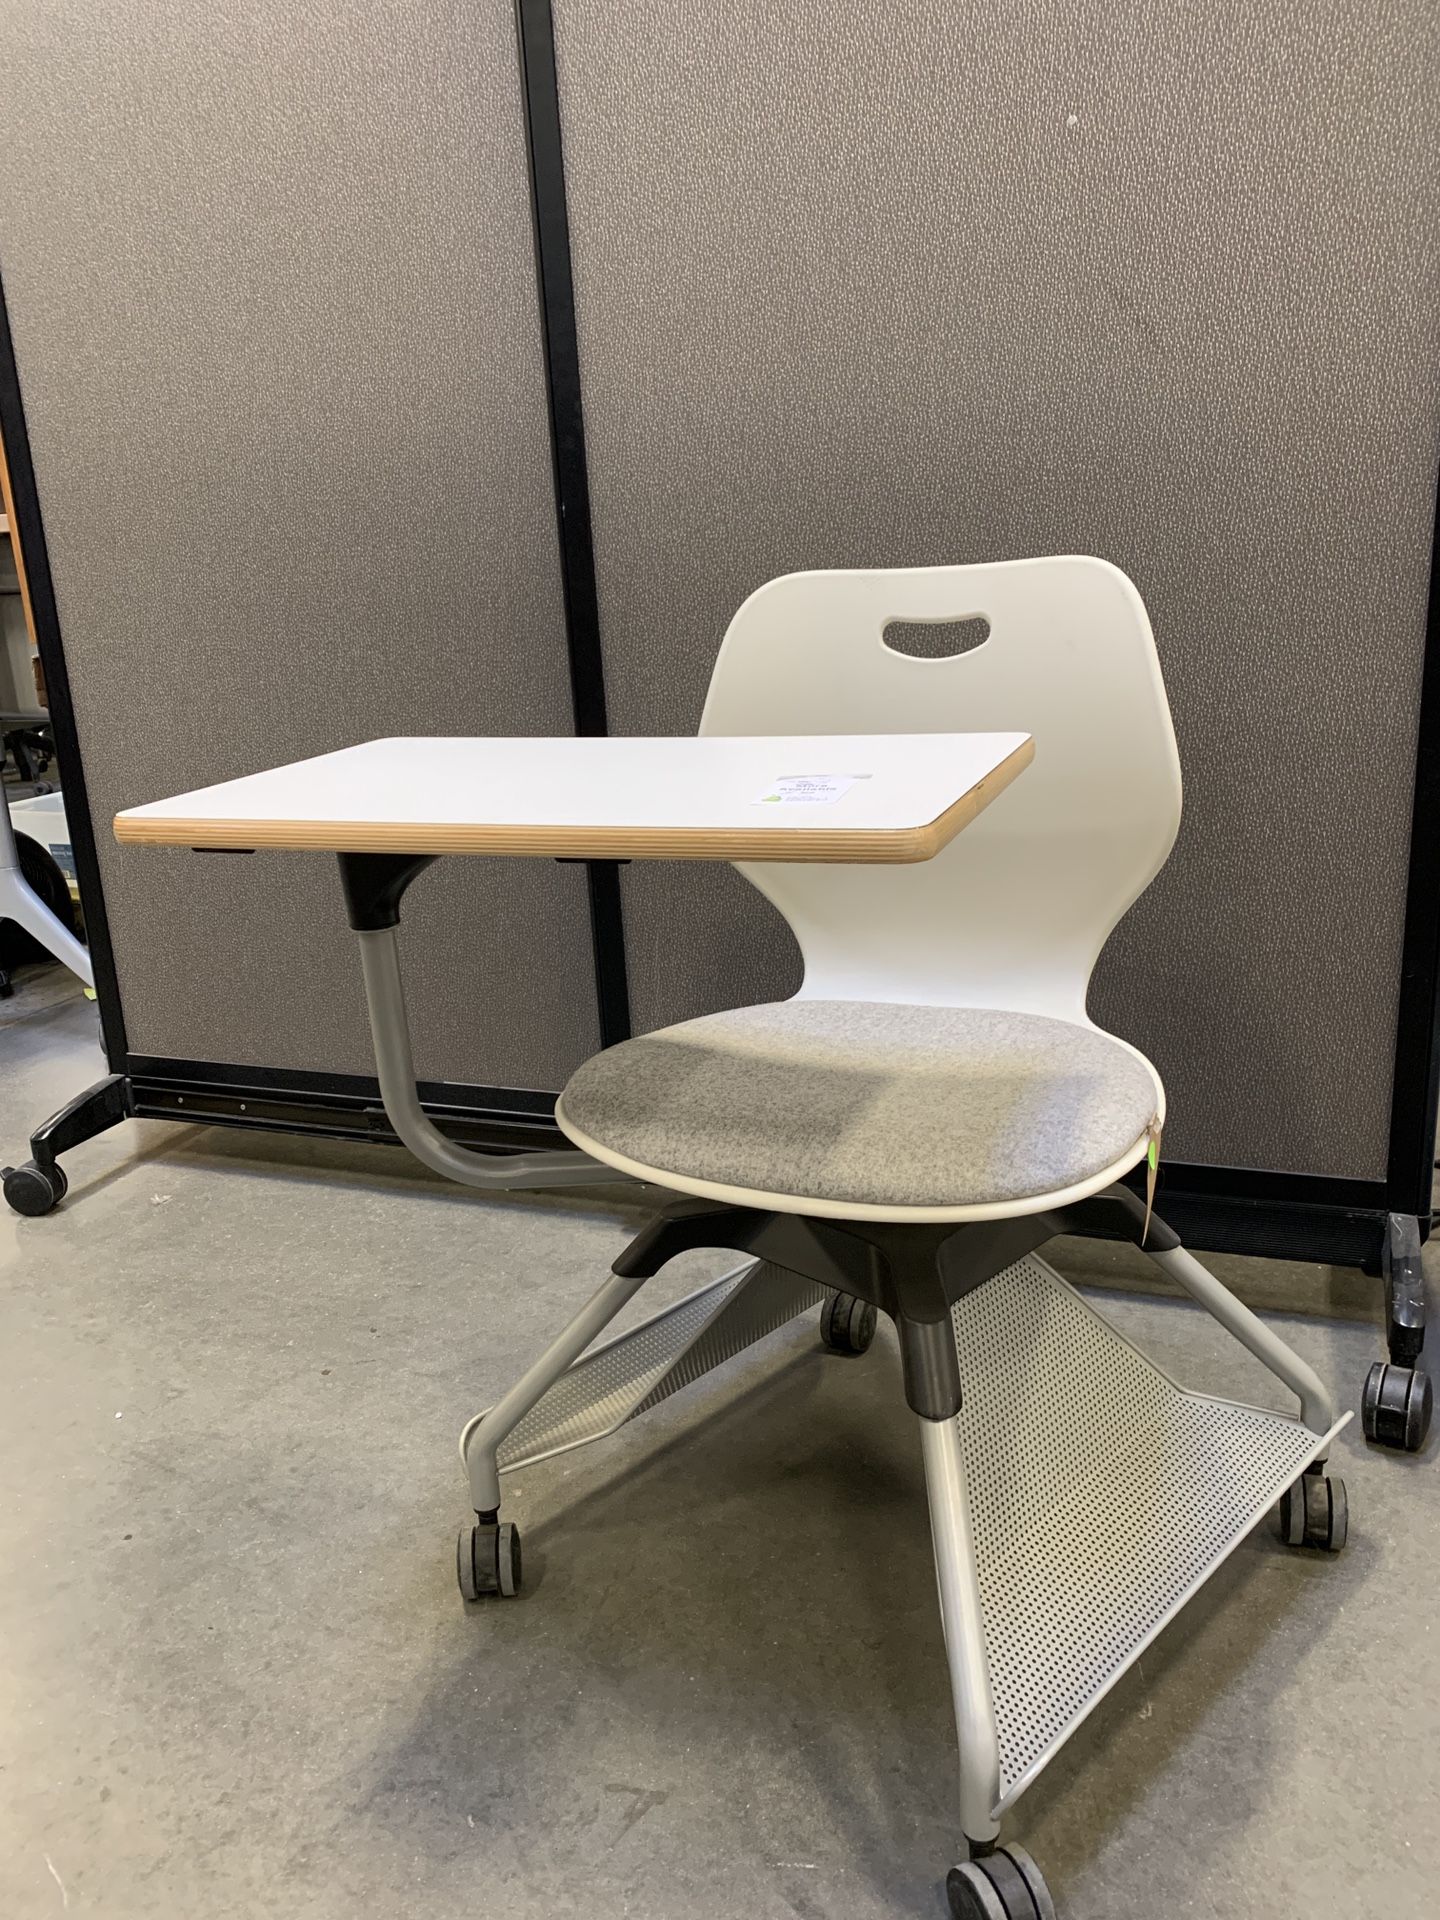 School office task chair with tablet on wheels